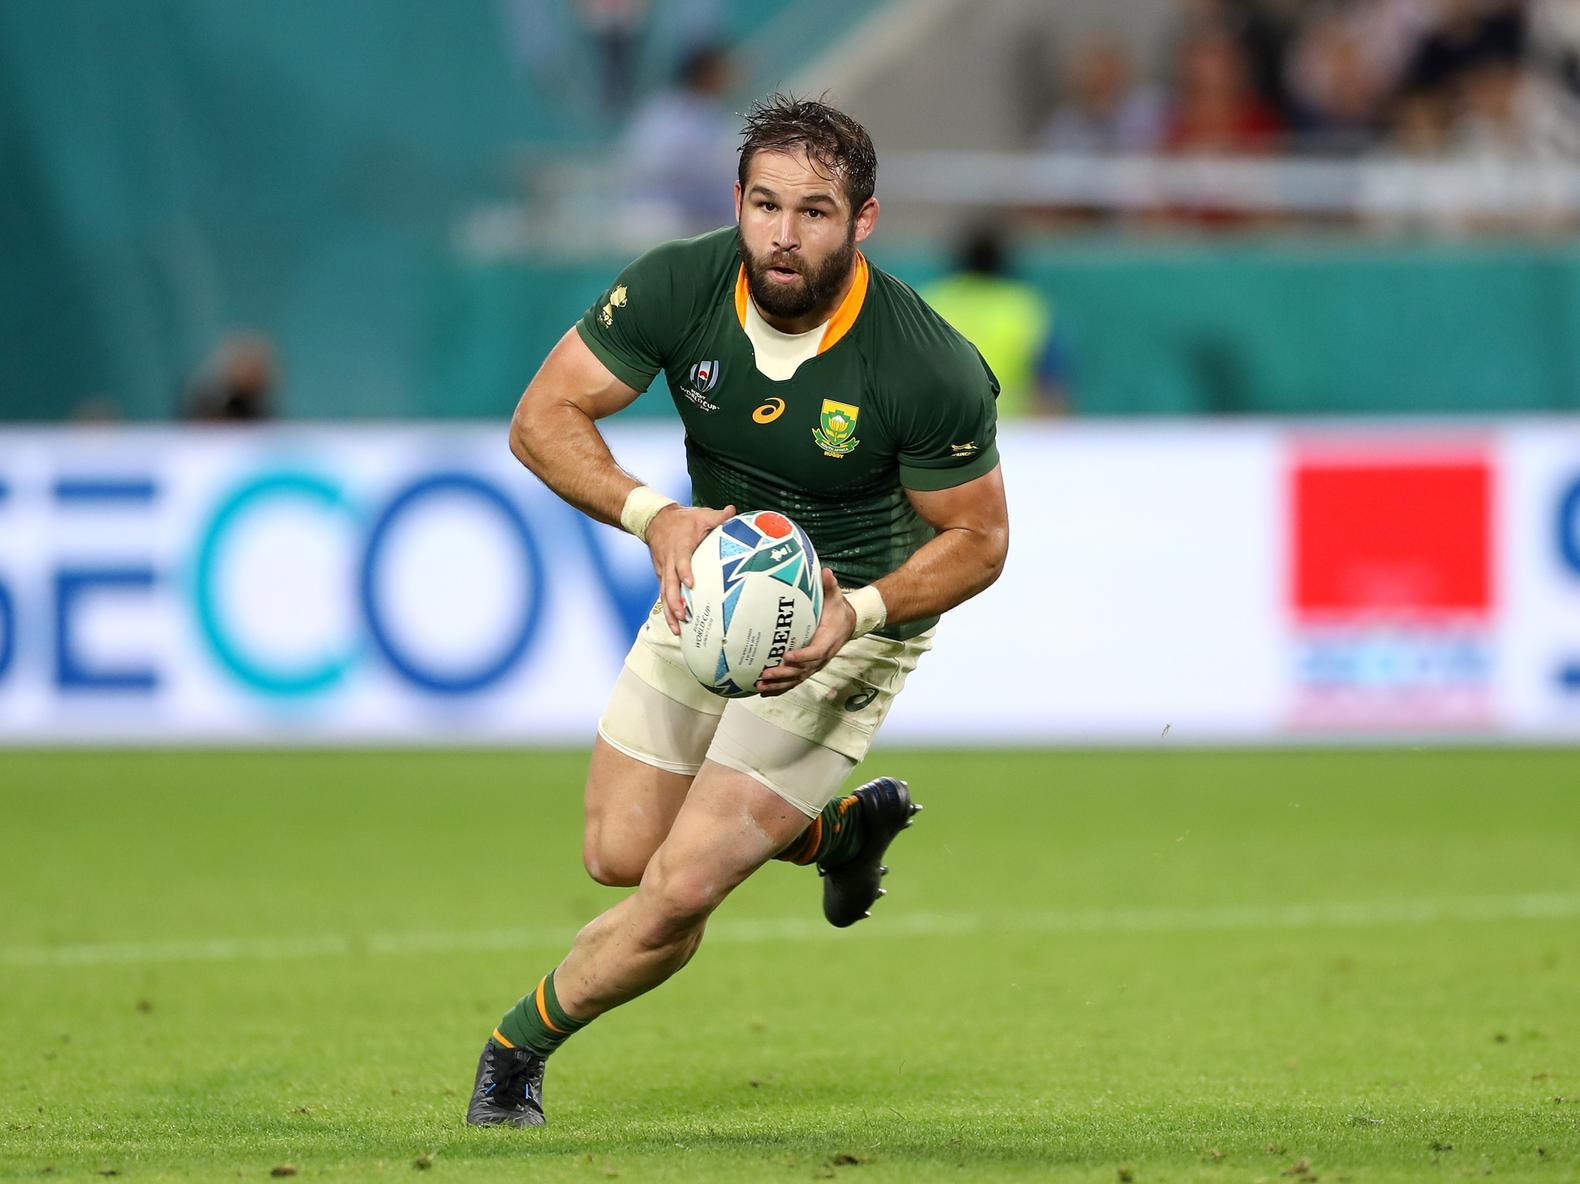 Things just keep getting better for the South Africa scrum-half, who won the World Cup after being named Saints' players' and supporters' player of the season for 2018/19